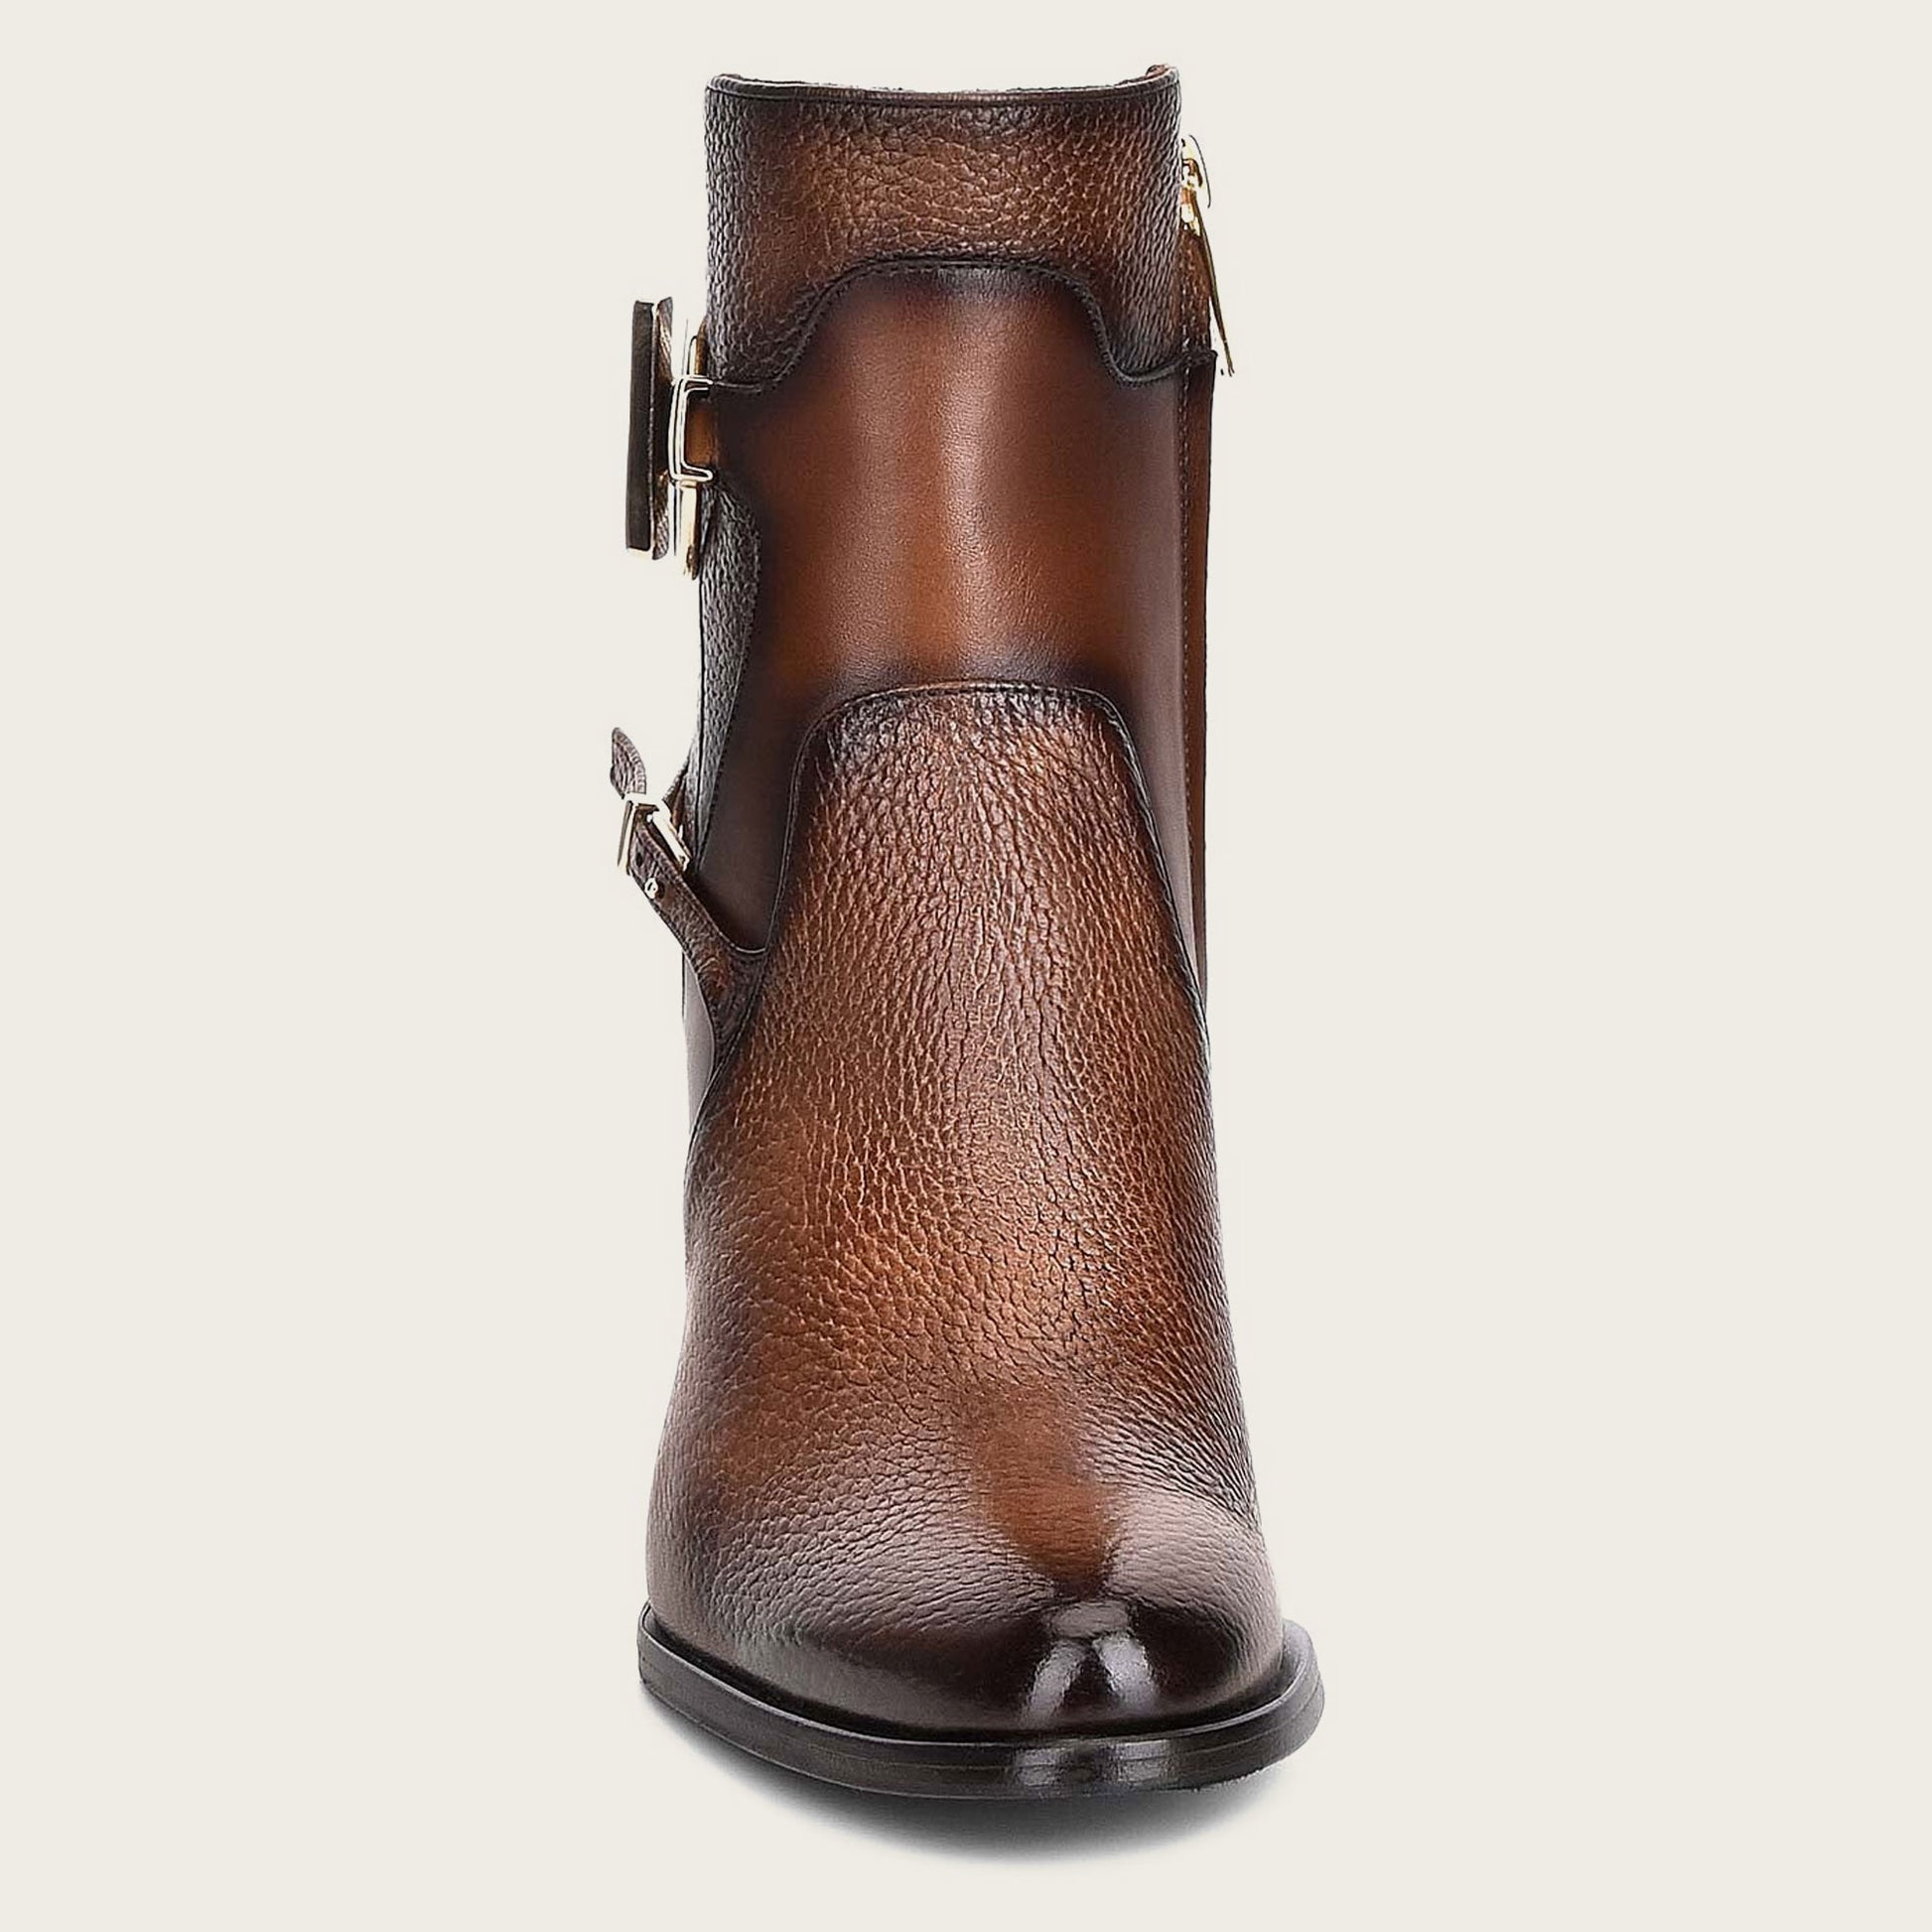 Handcrafted honey deer leather bootie with decorative stitching